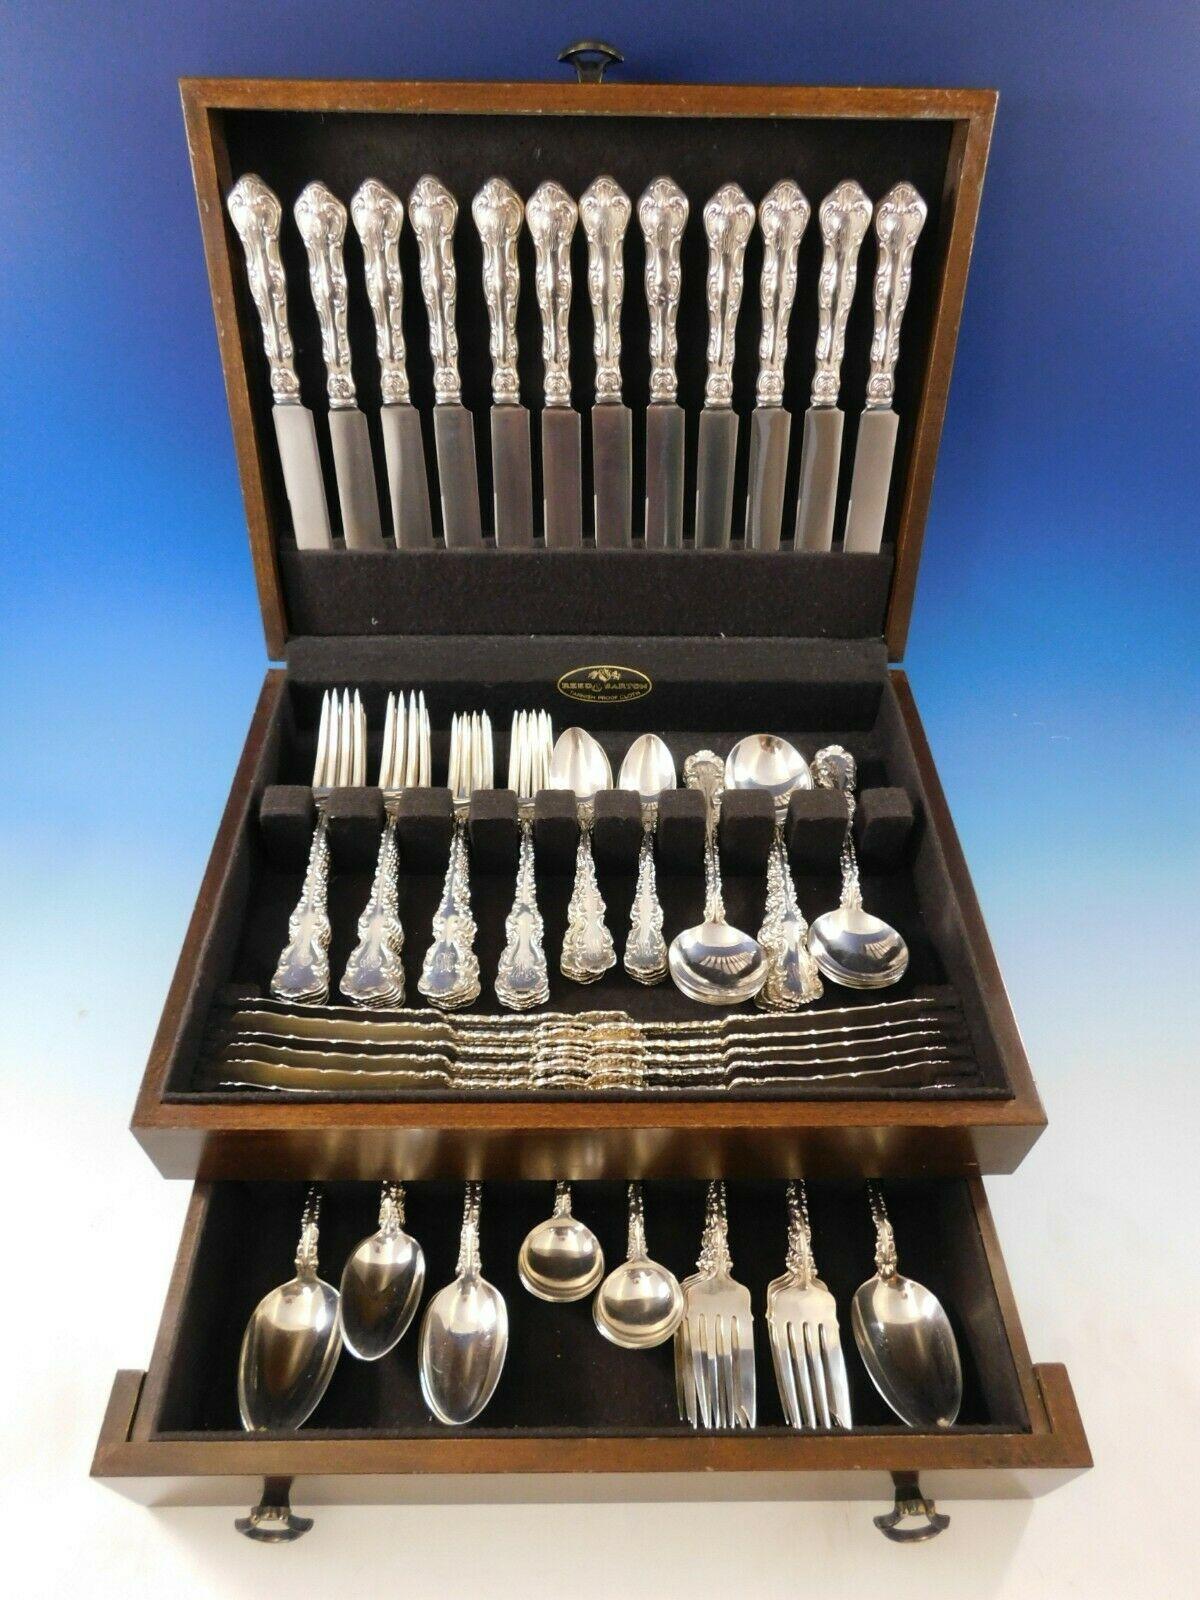 Dinner size Louis XV by Whiting sterling silver flatware set, 110 pieces (with Strasbourg knives). This set includes:

12 dinner size knives, 9 1/2